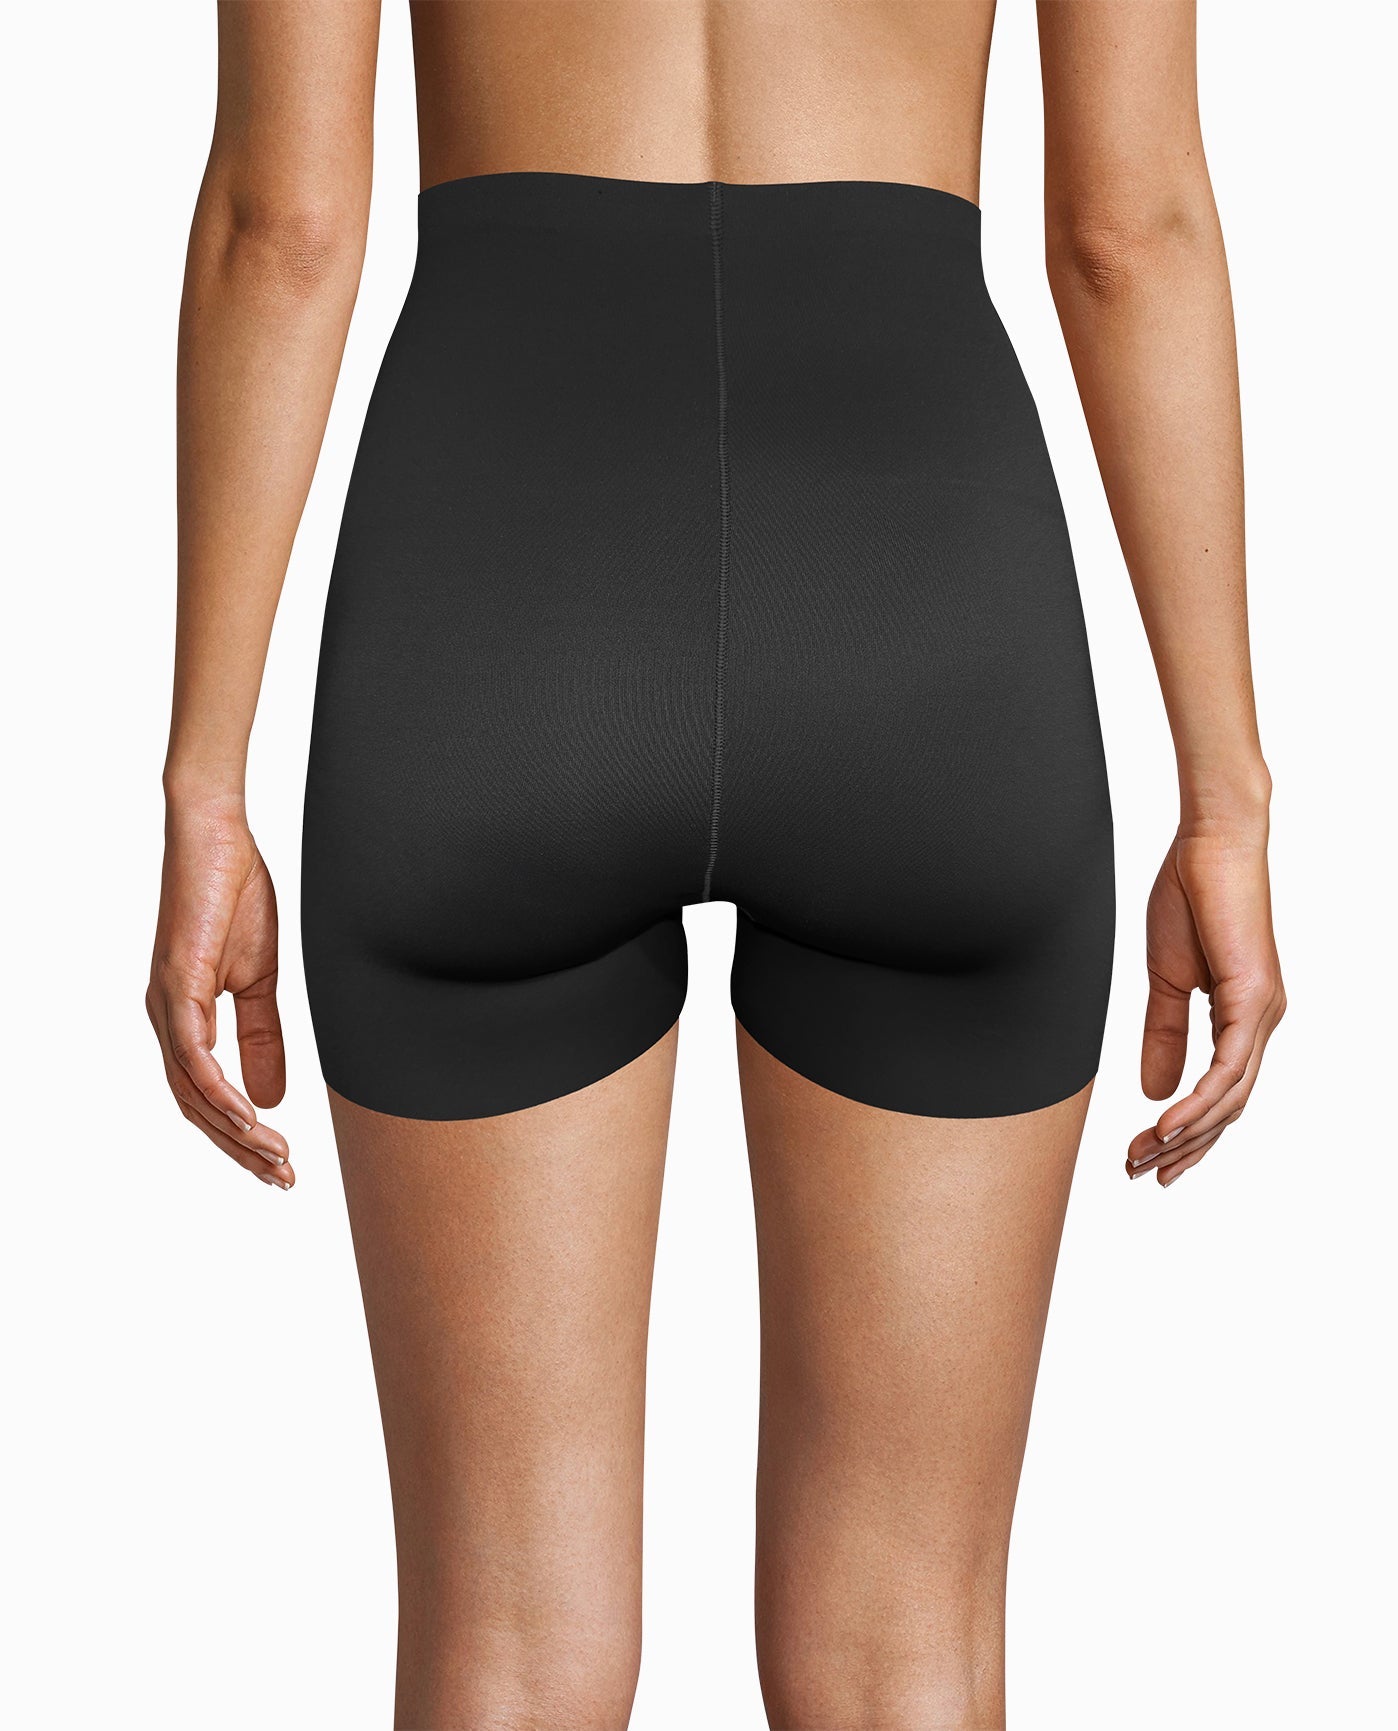 BACK OF BLACK SCUBA HIGH WAISTED SHAPING SHORTS | Black and Cafe Latte